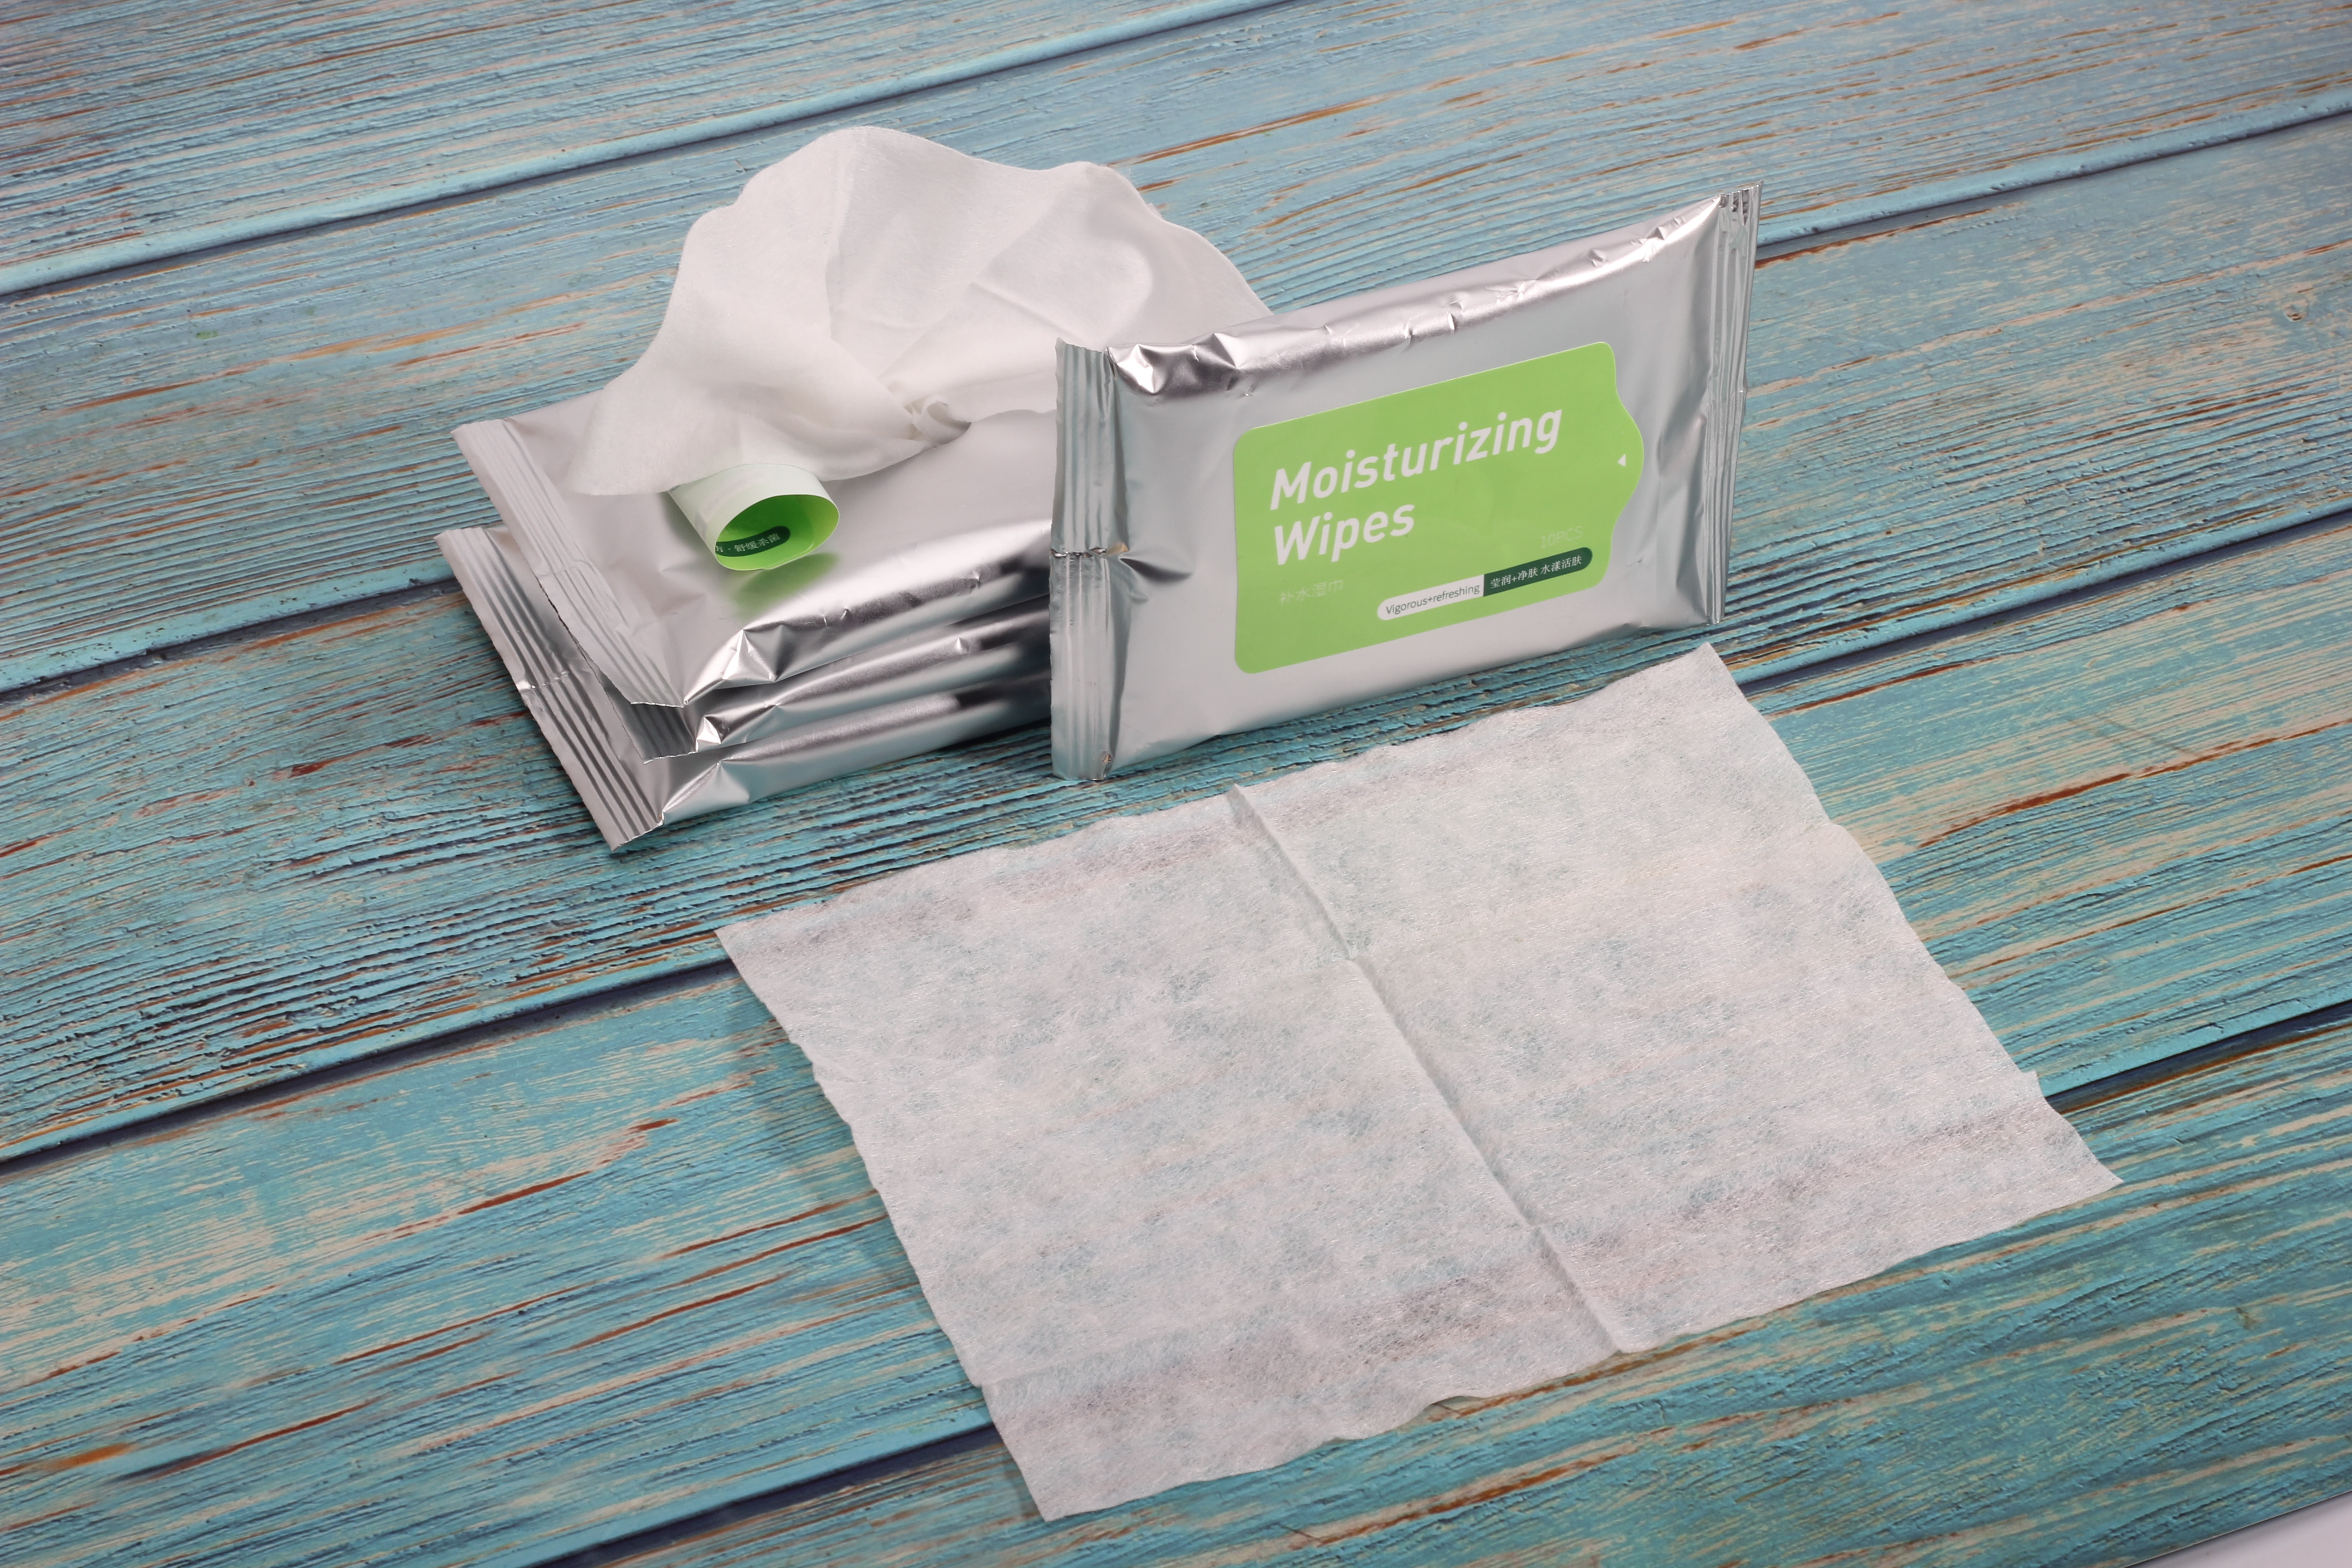 Premium Wet Tissue: Convenient and Effective Anti-Bacterial Protection